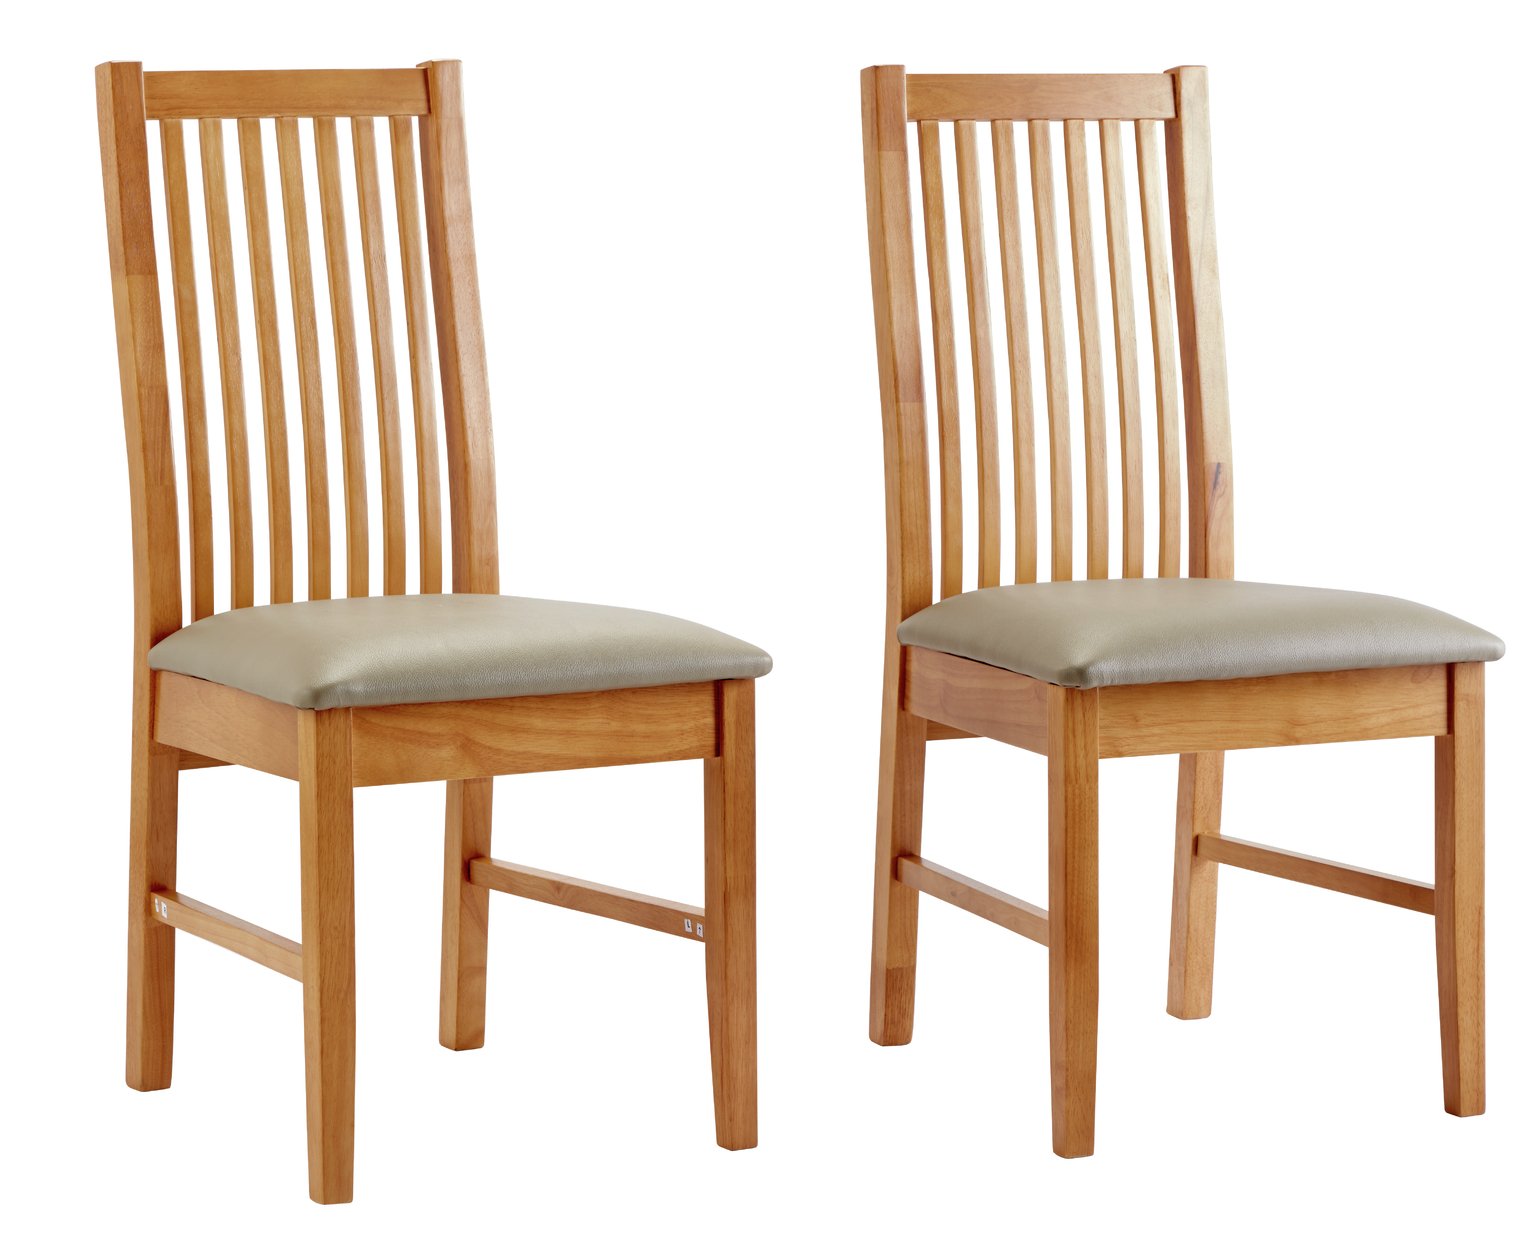 Argos Home Paris Pair of Solid Oak Dining Chairs Reviews